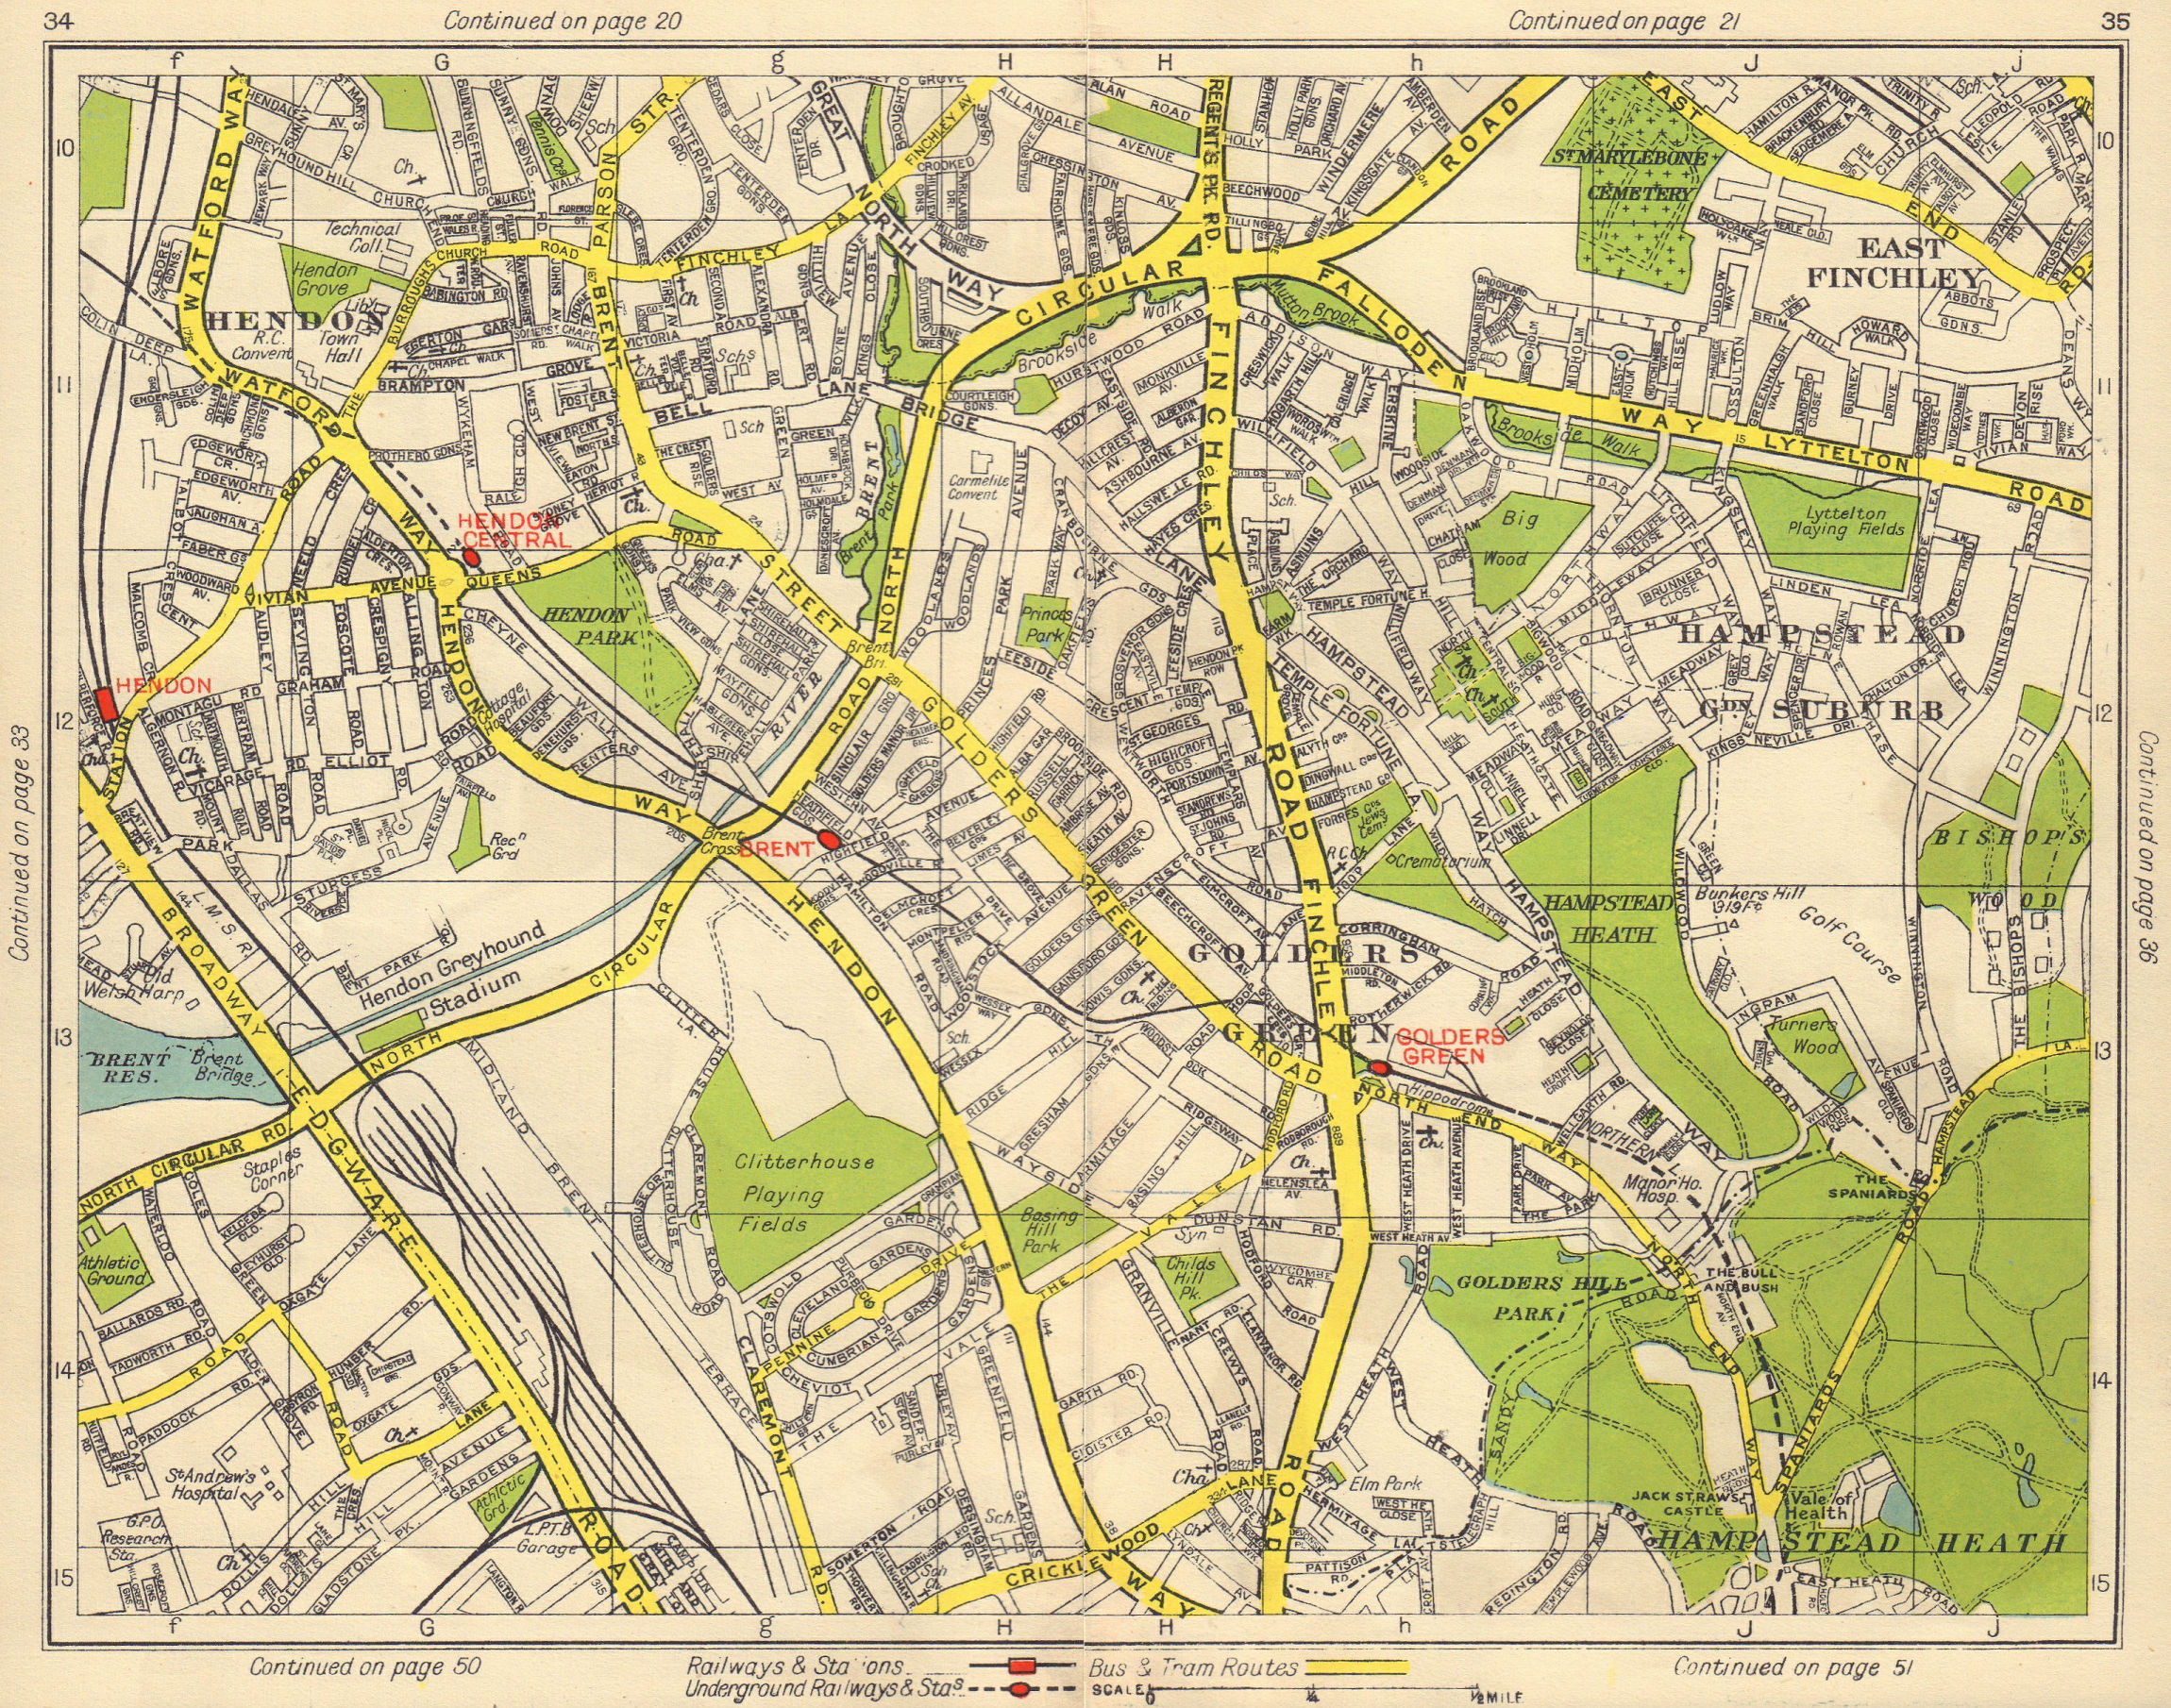 NW LONDON. Hendon East Finchley Golder's Green Child's Hill North End 1948 map